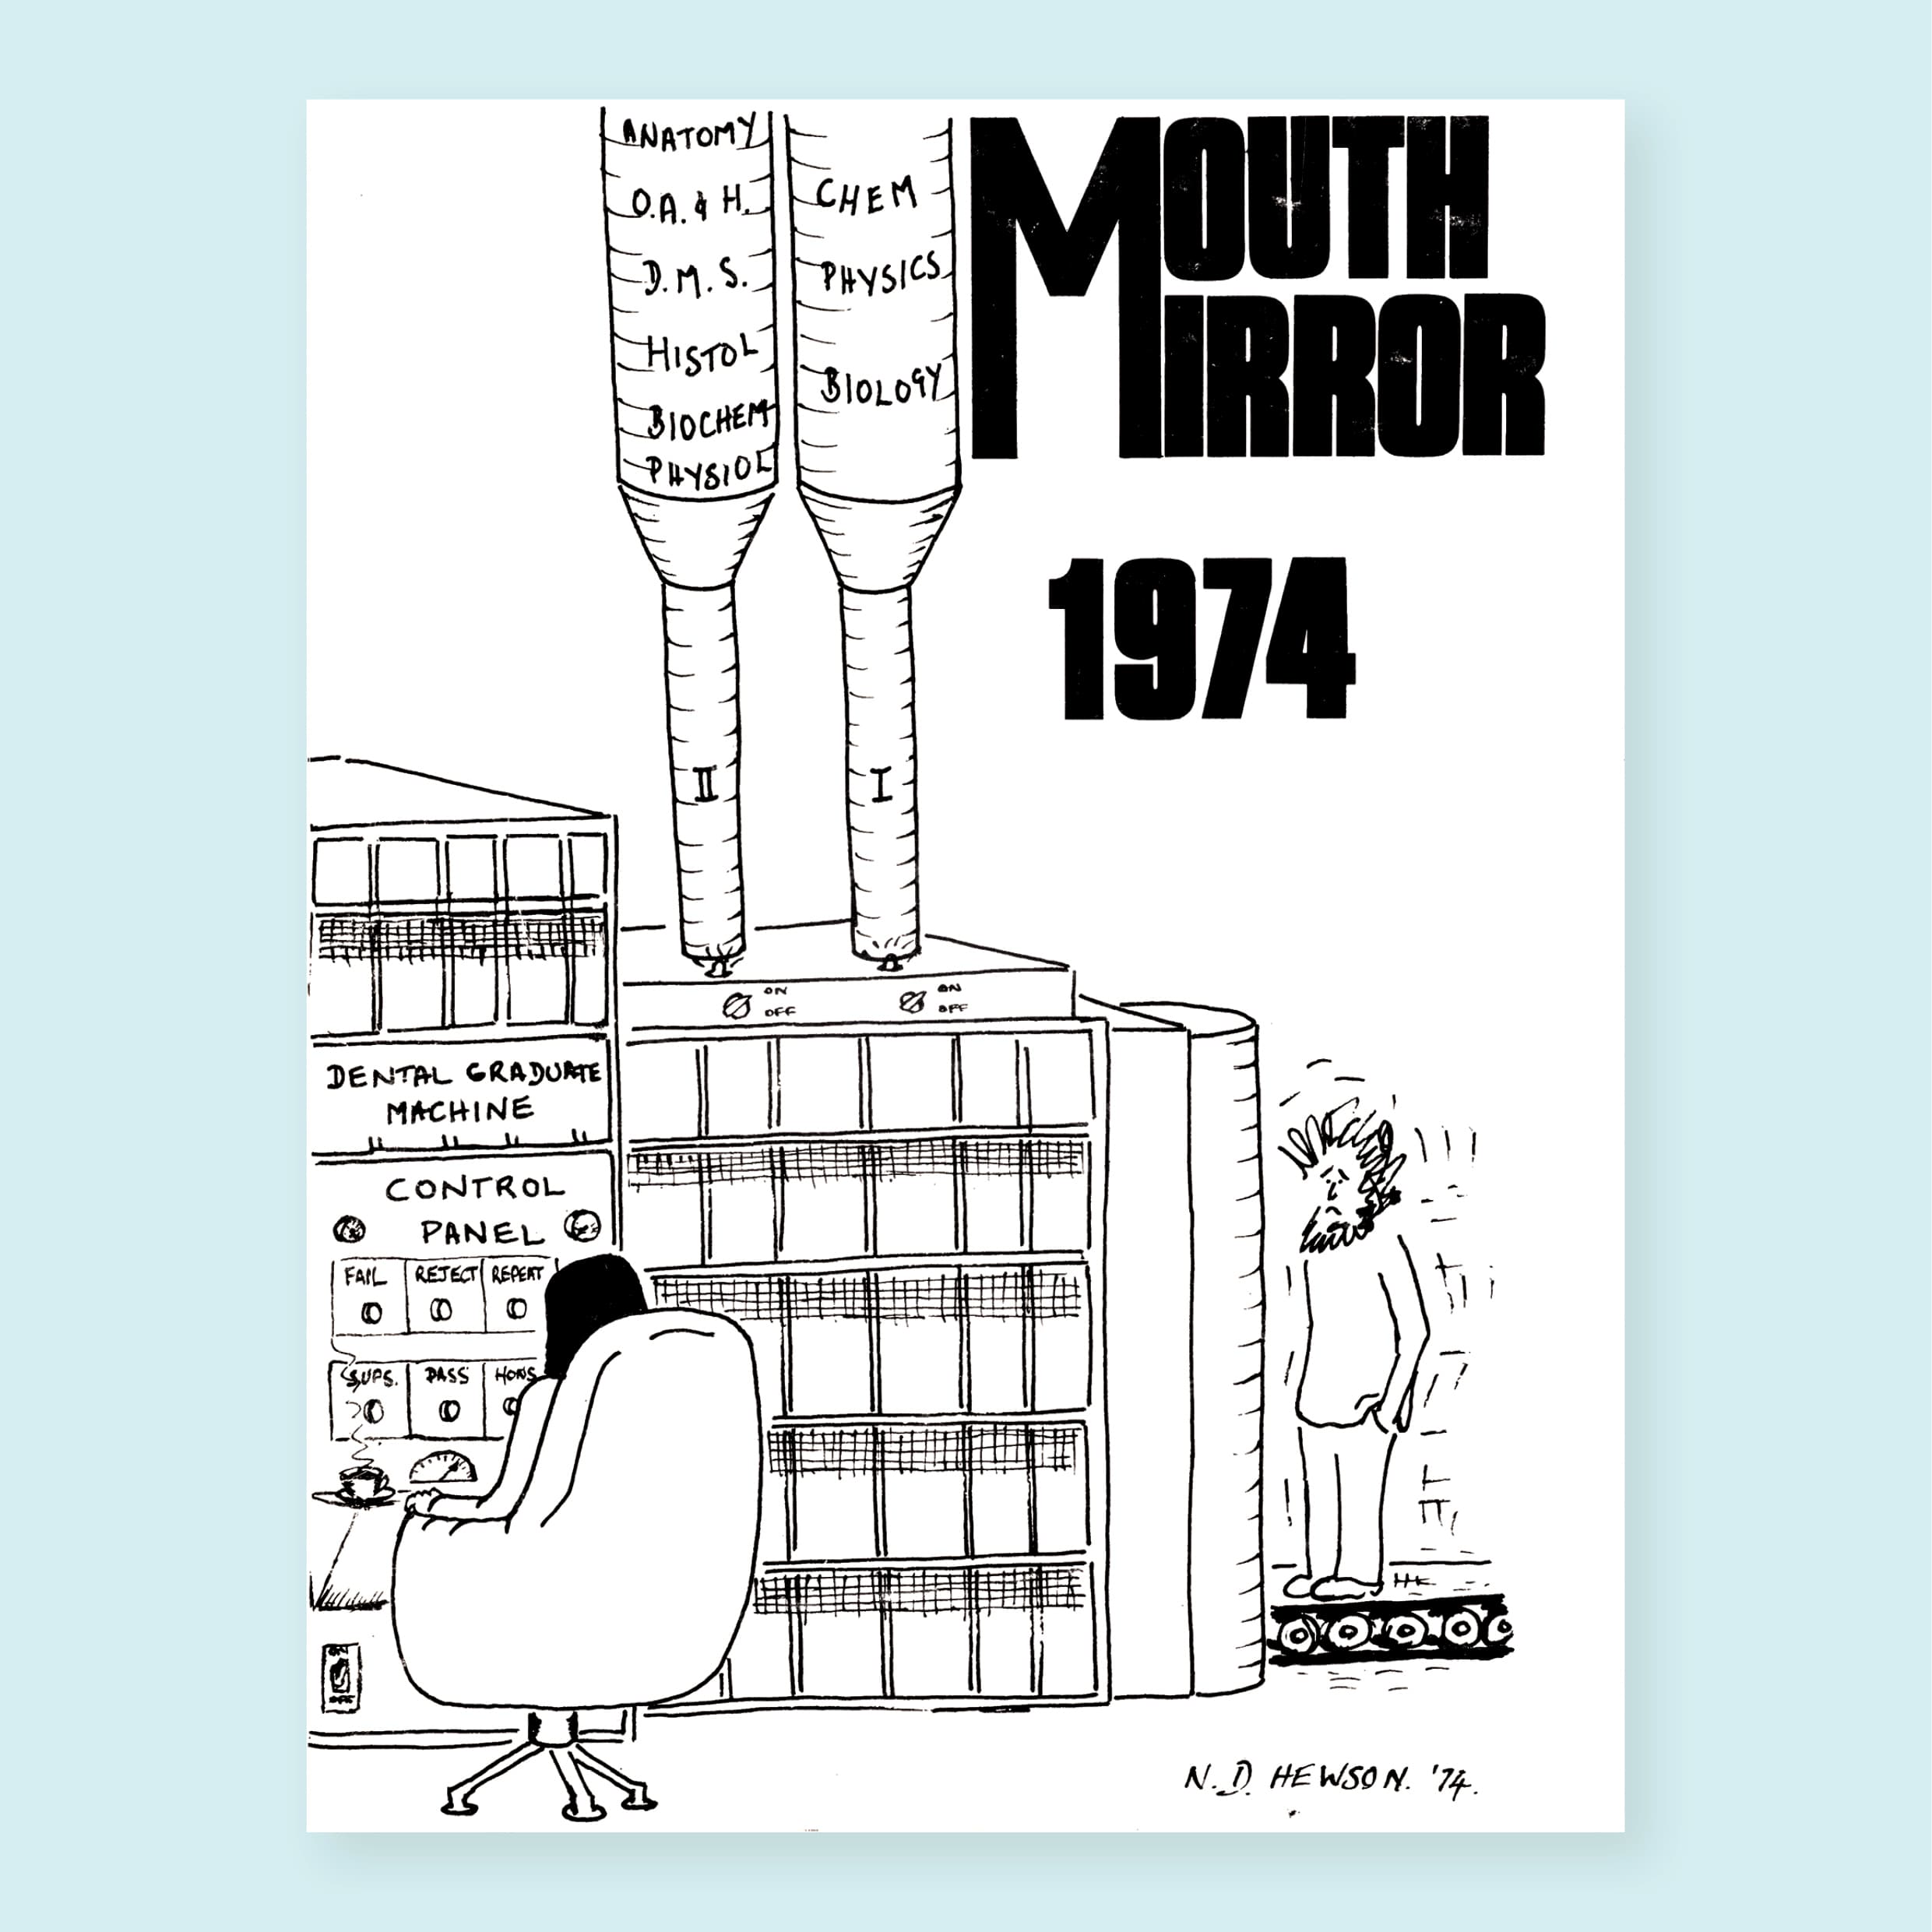 Melbourne Dental Students’ Society, cover cartoon by Neil D Hewson, The Mouth Mirror, 1974, magazine: print on paper, 26.5 × 20.0 cm. HFADM 3110.23, Henry Forman Atkinson Dental Museum, University of Melbourne. 